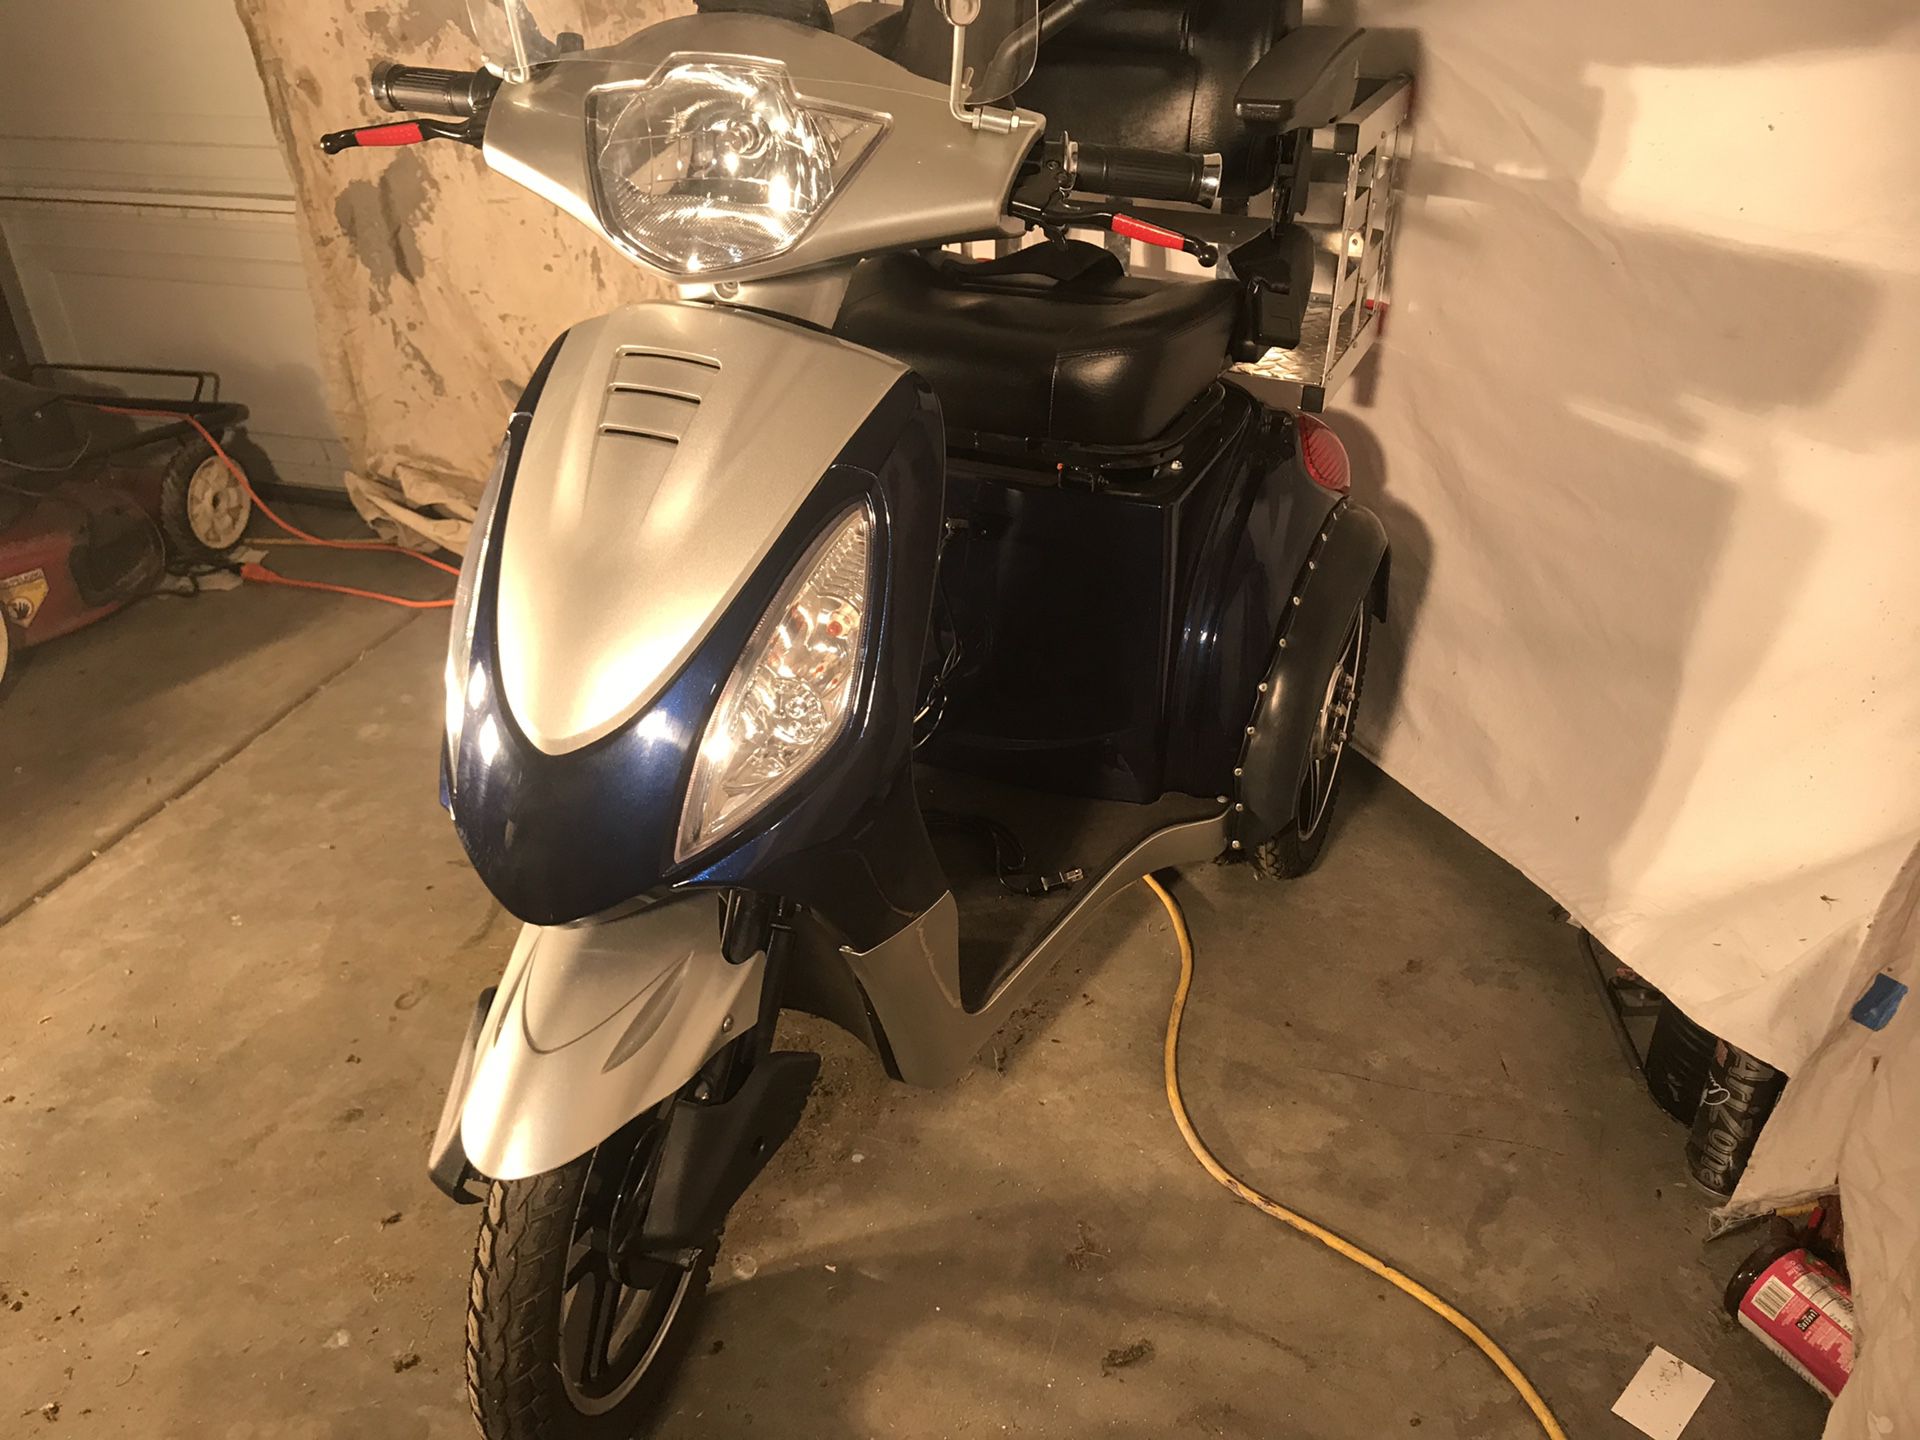 2017 freedoms z3 dually scooter w/trailer ...to 45 mph  Jo